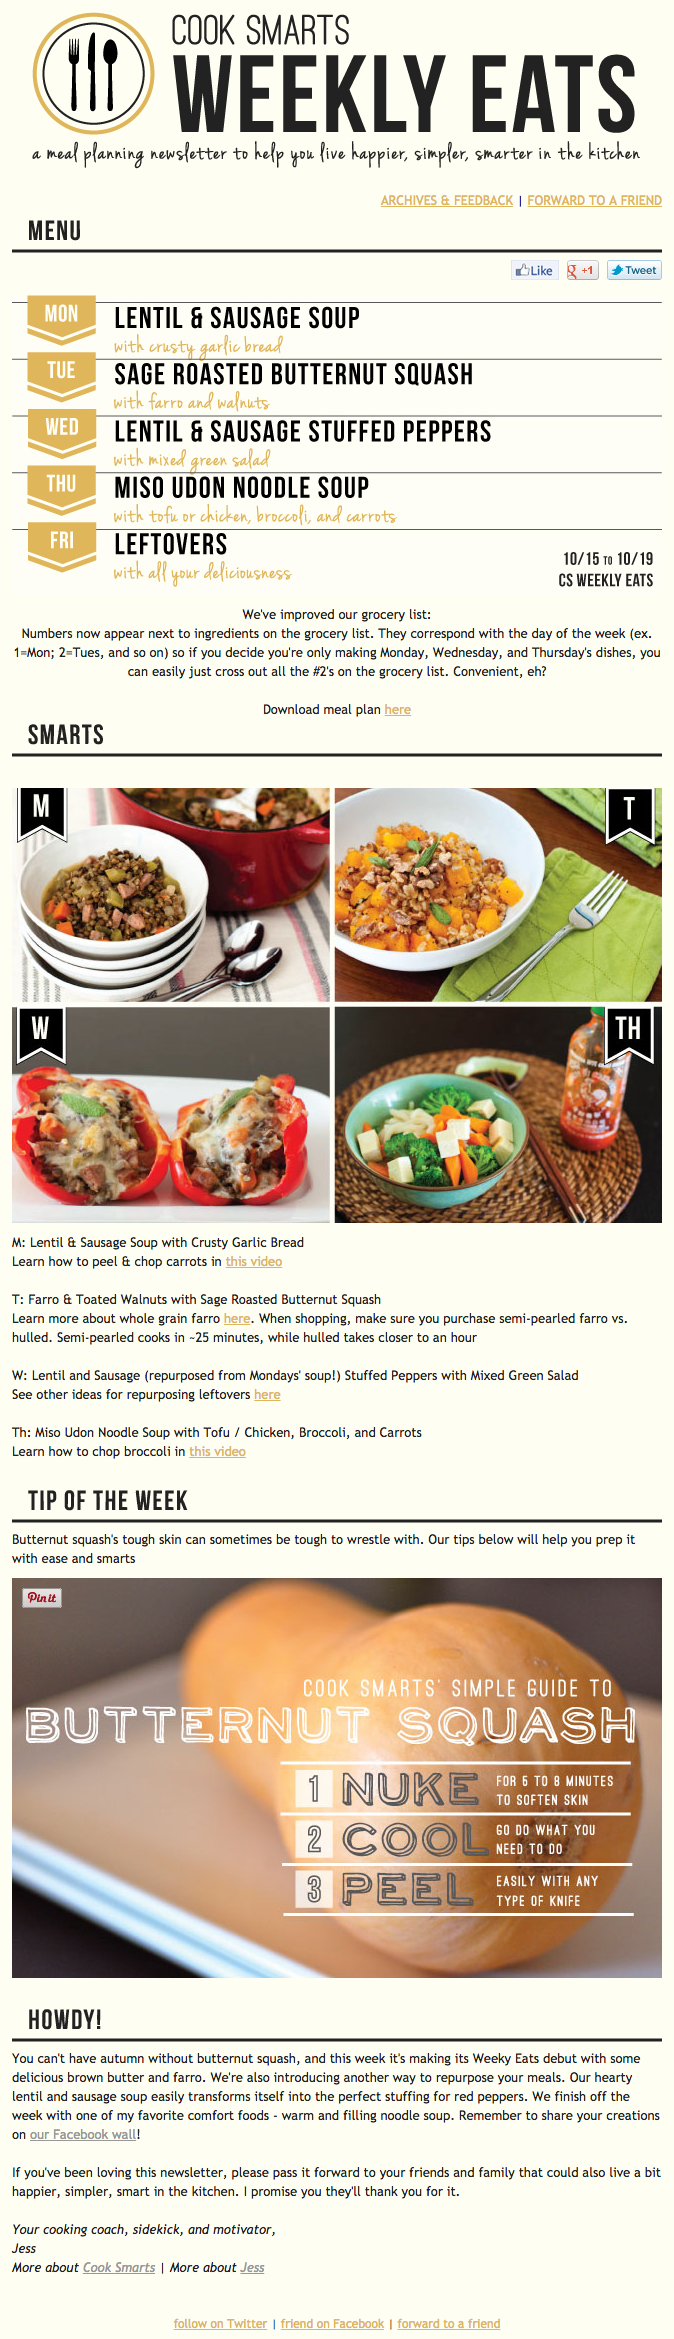 Email marketing campaign on Weekly Eats by Cook Smarts